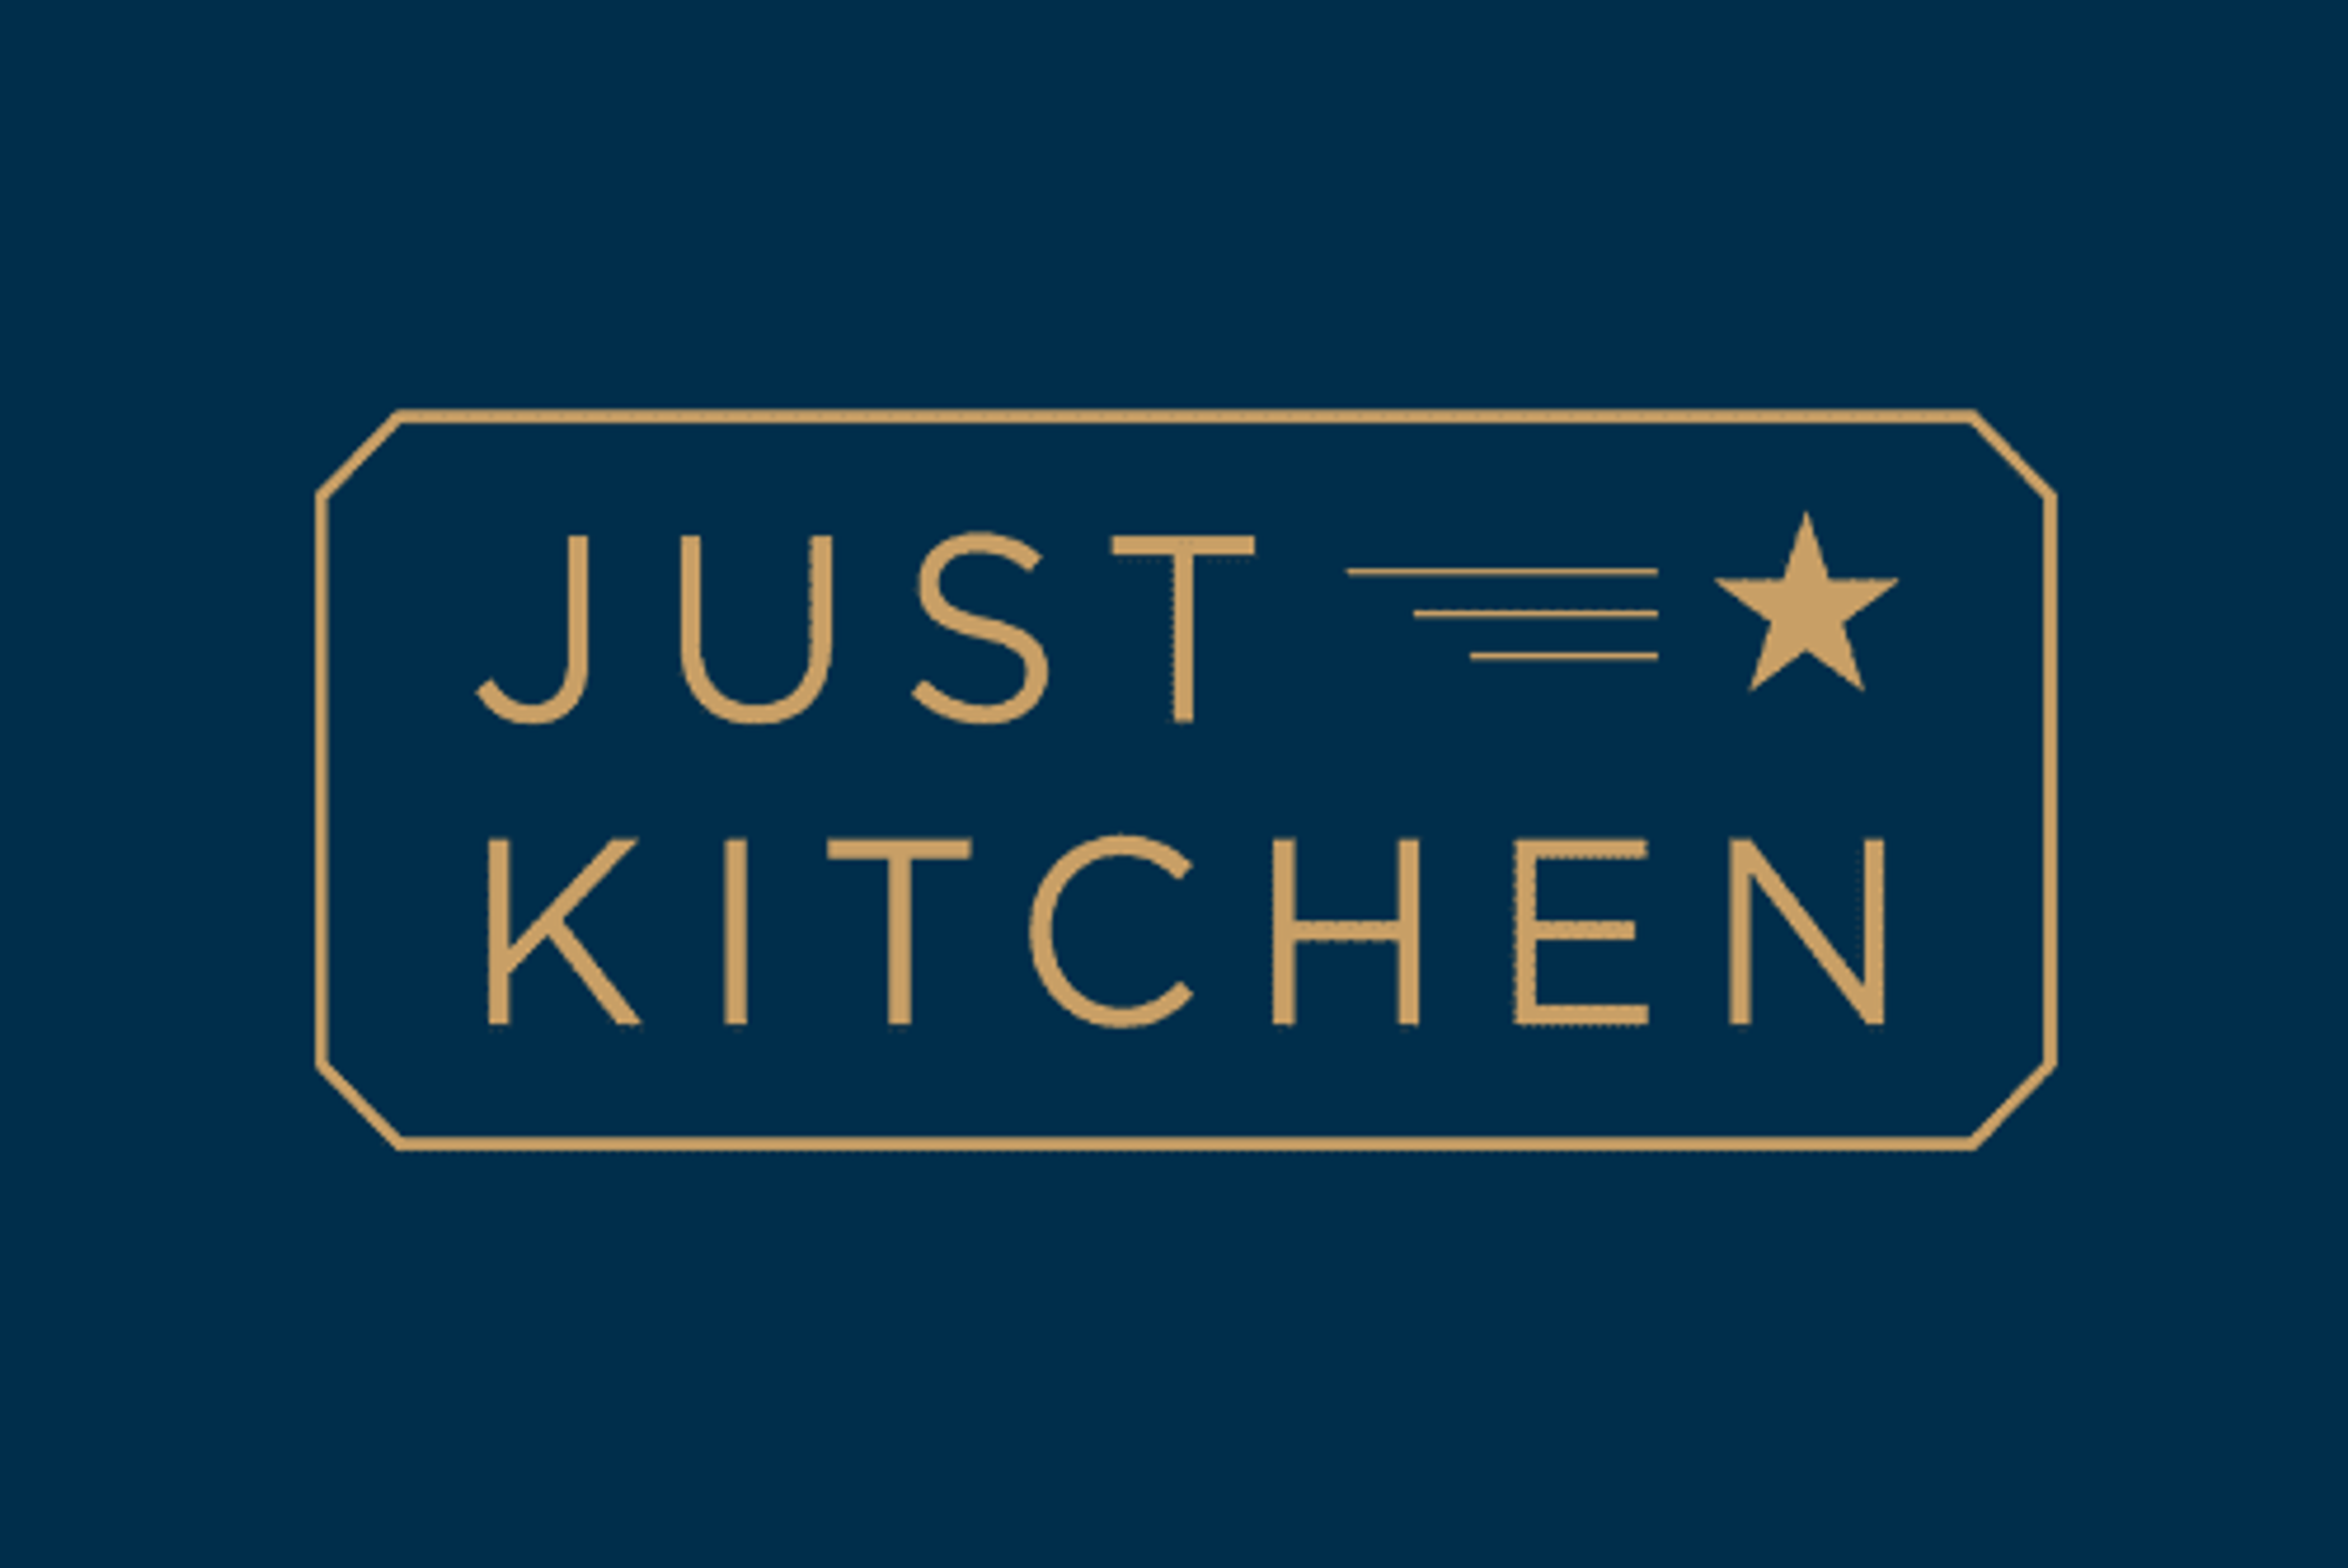 JustKitchen Opens Exclusive Location in Taoyuan Environmental Science and Technology Park via its JKOS Ordering System